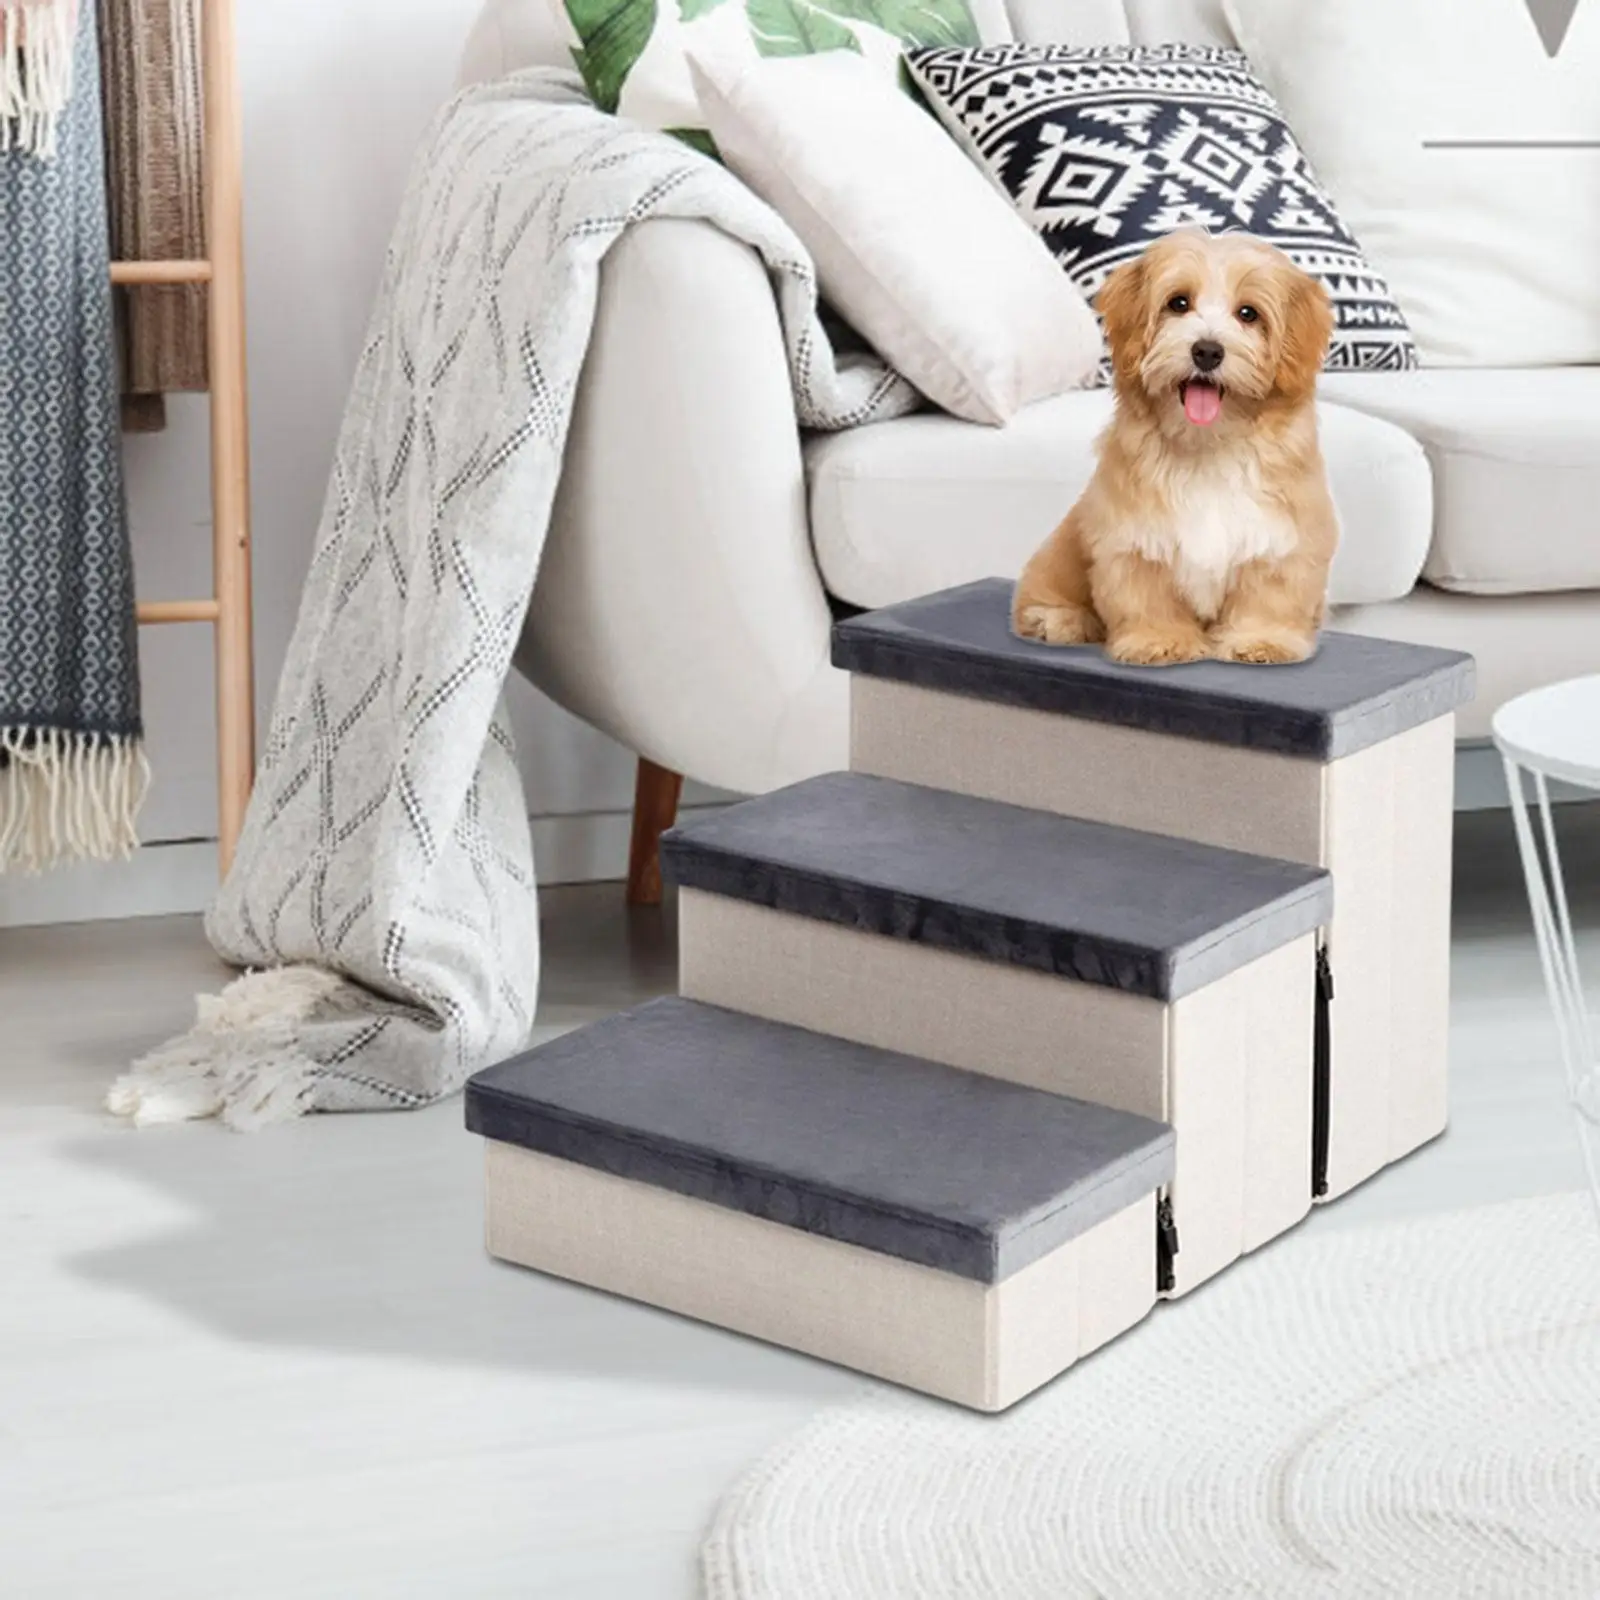 3 Tiers Pet Steps Dog Stairs Removable Cover Pet Climbing Ladder Portable Ramp Stairs with Storage Box for Sofa, Bed Indoor